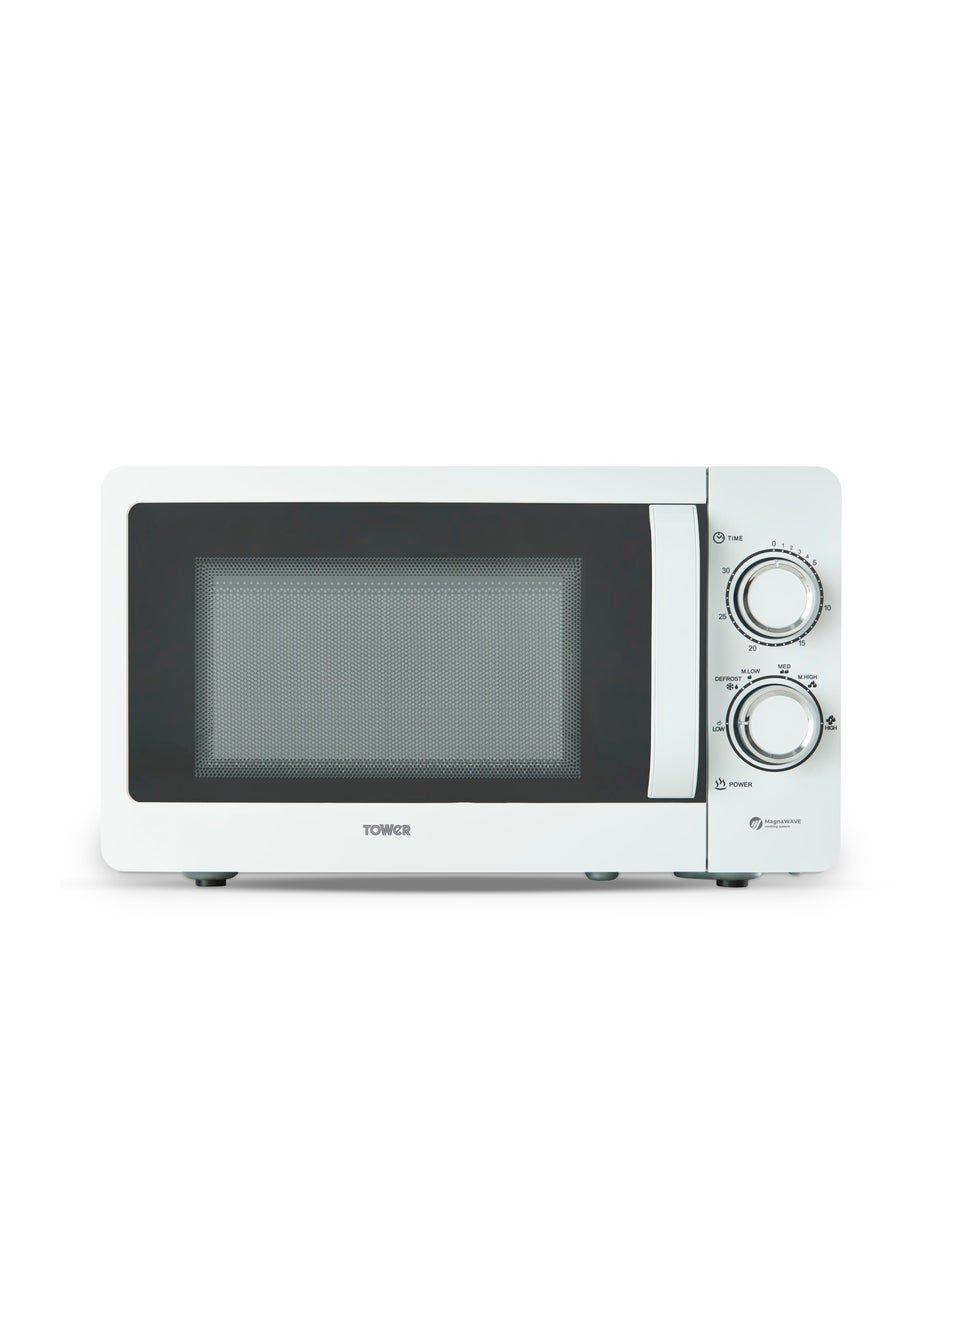 Tower 800W Manual Microwave (20L)